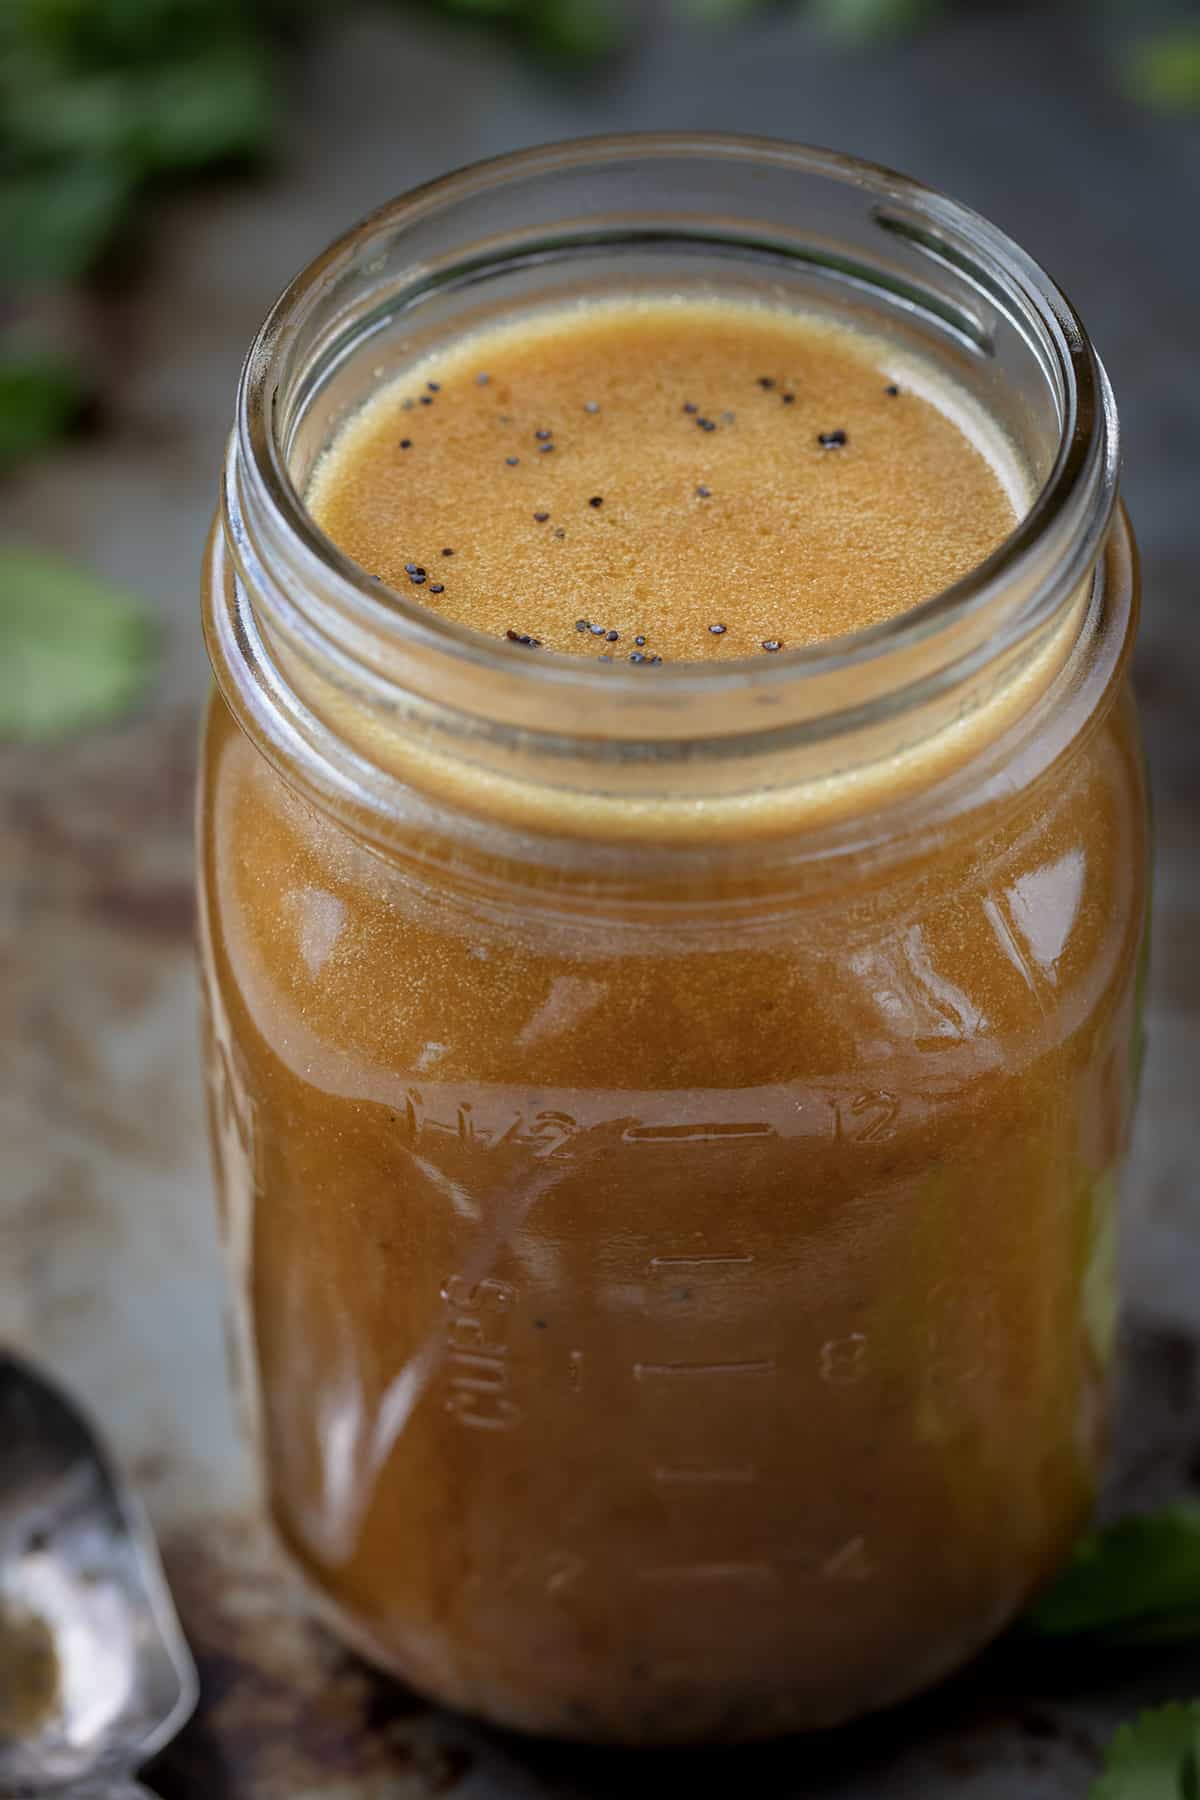 Jar of Creamy Balsamic Vinaigrette on a Counter with Greens.